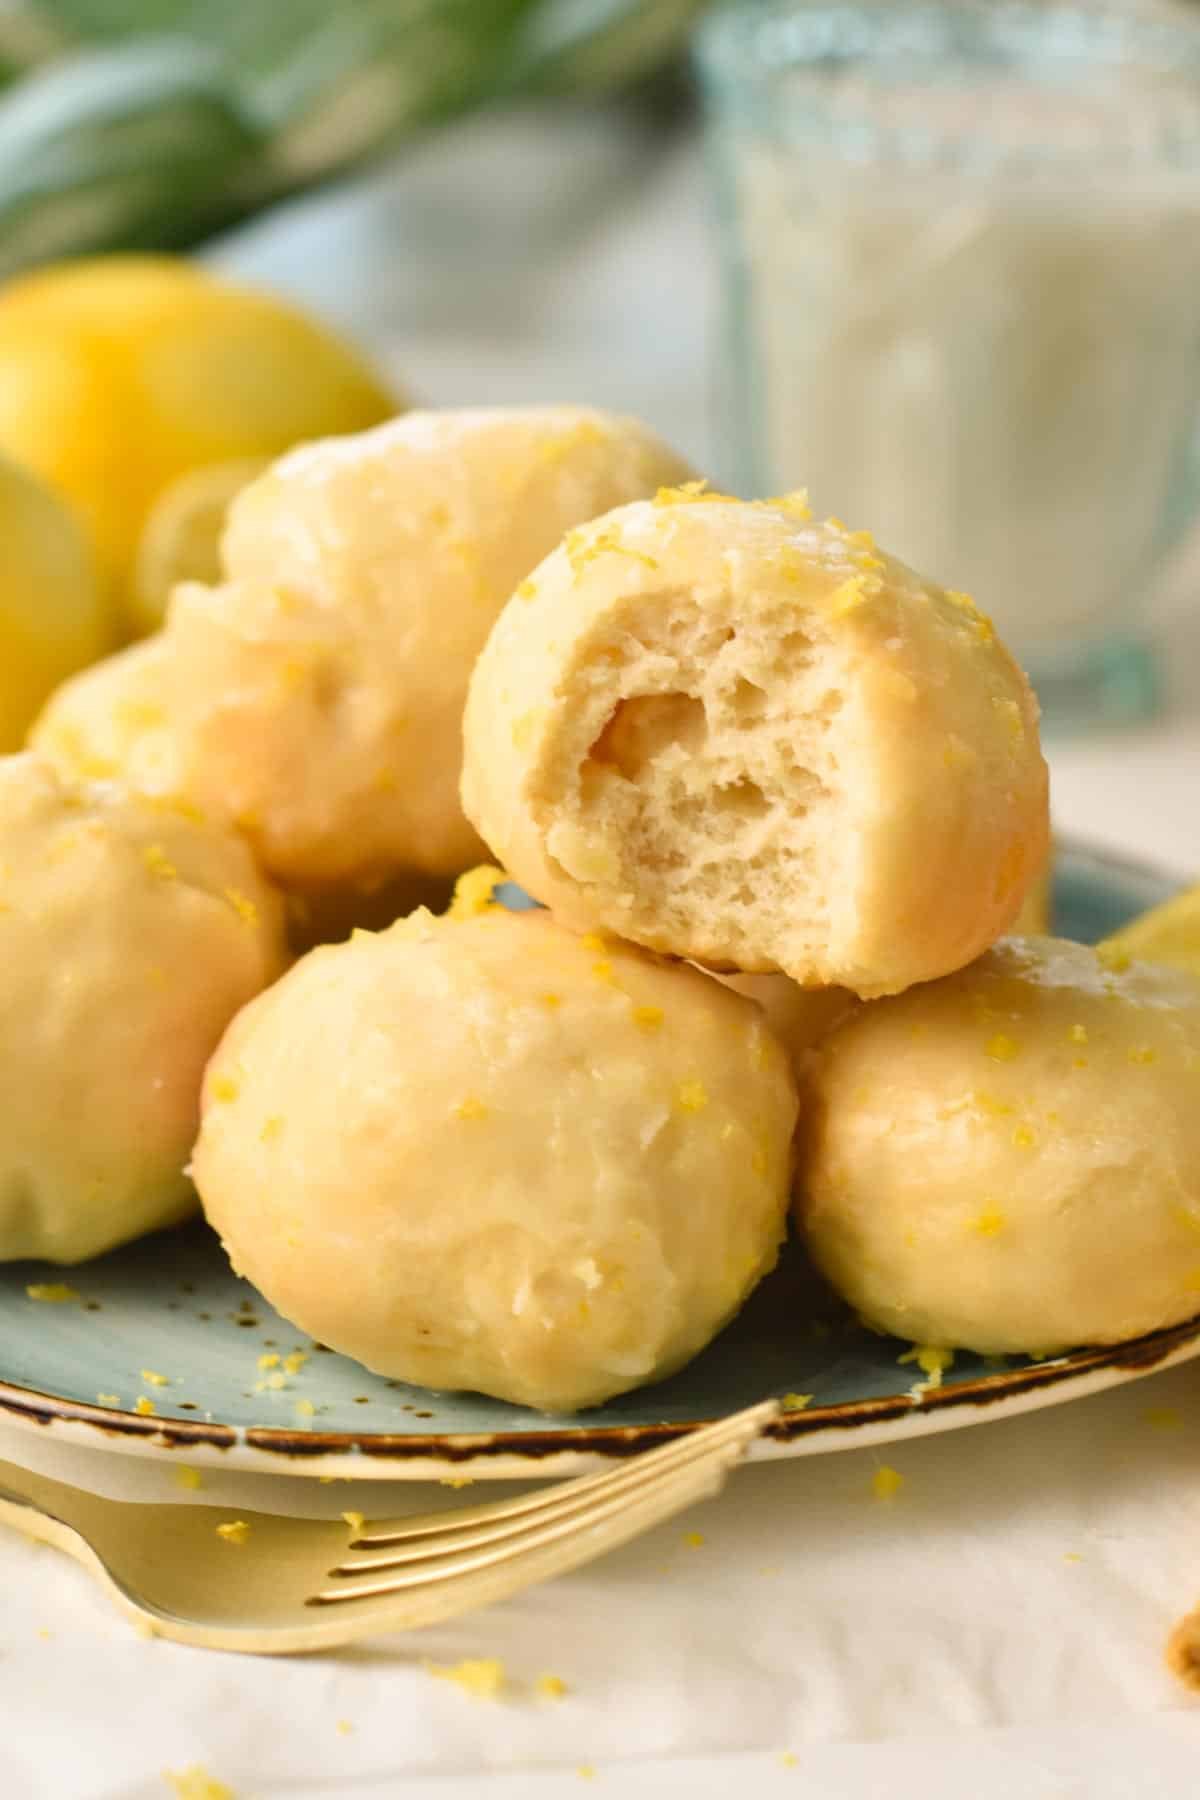 A stack of lemon glazed donut holes with the one on top half beaten showing the fluffy texture of the dough.